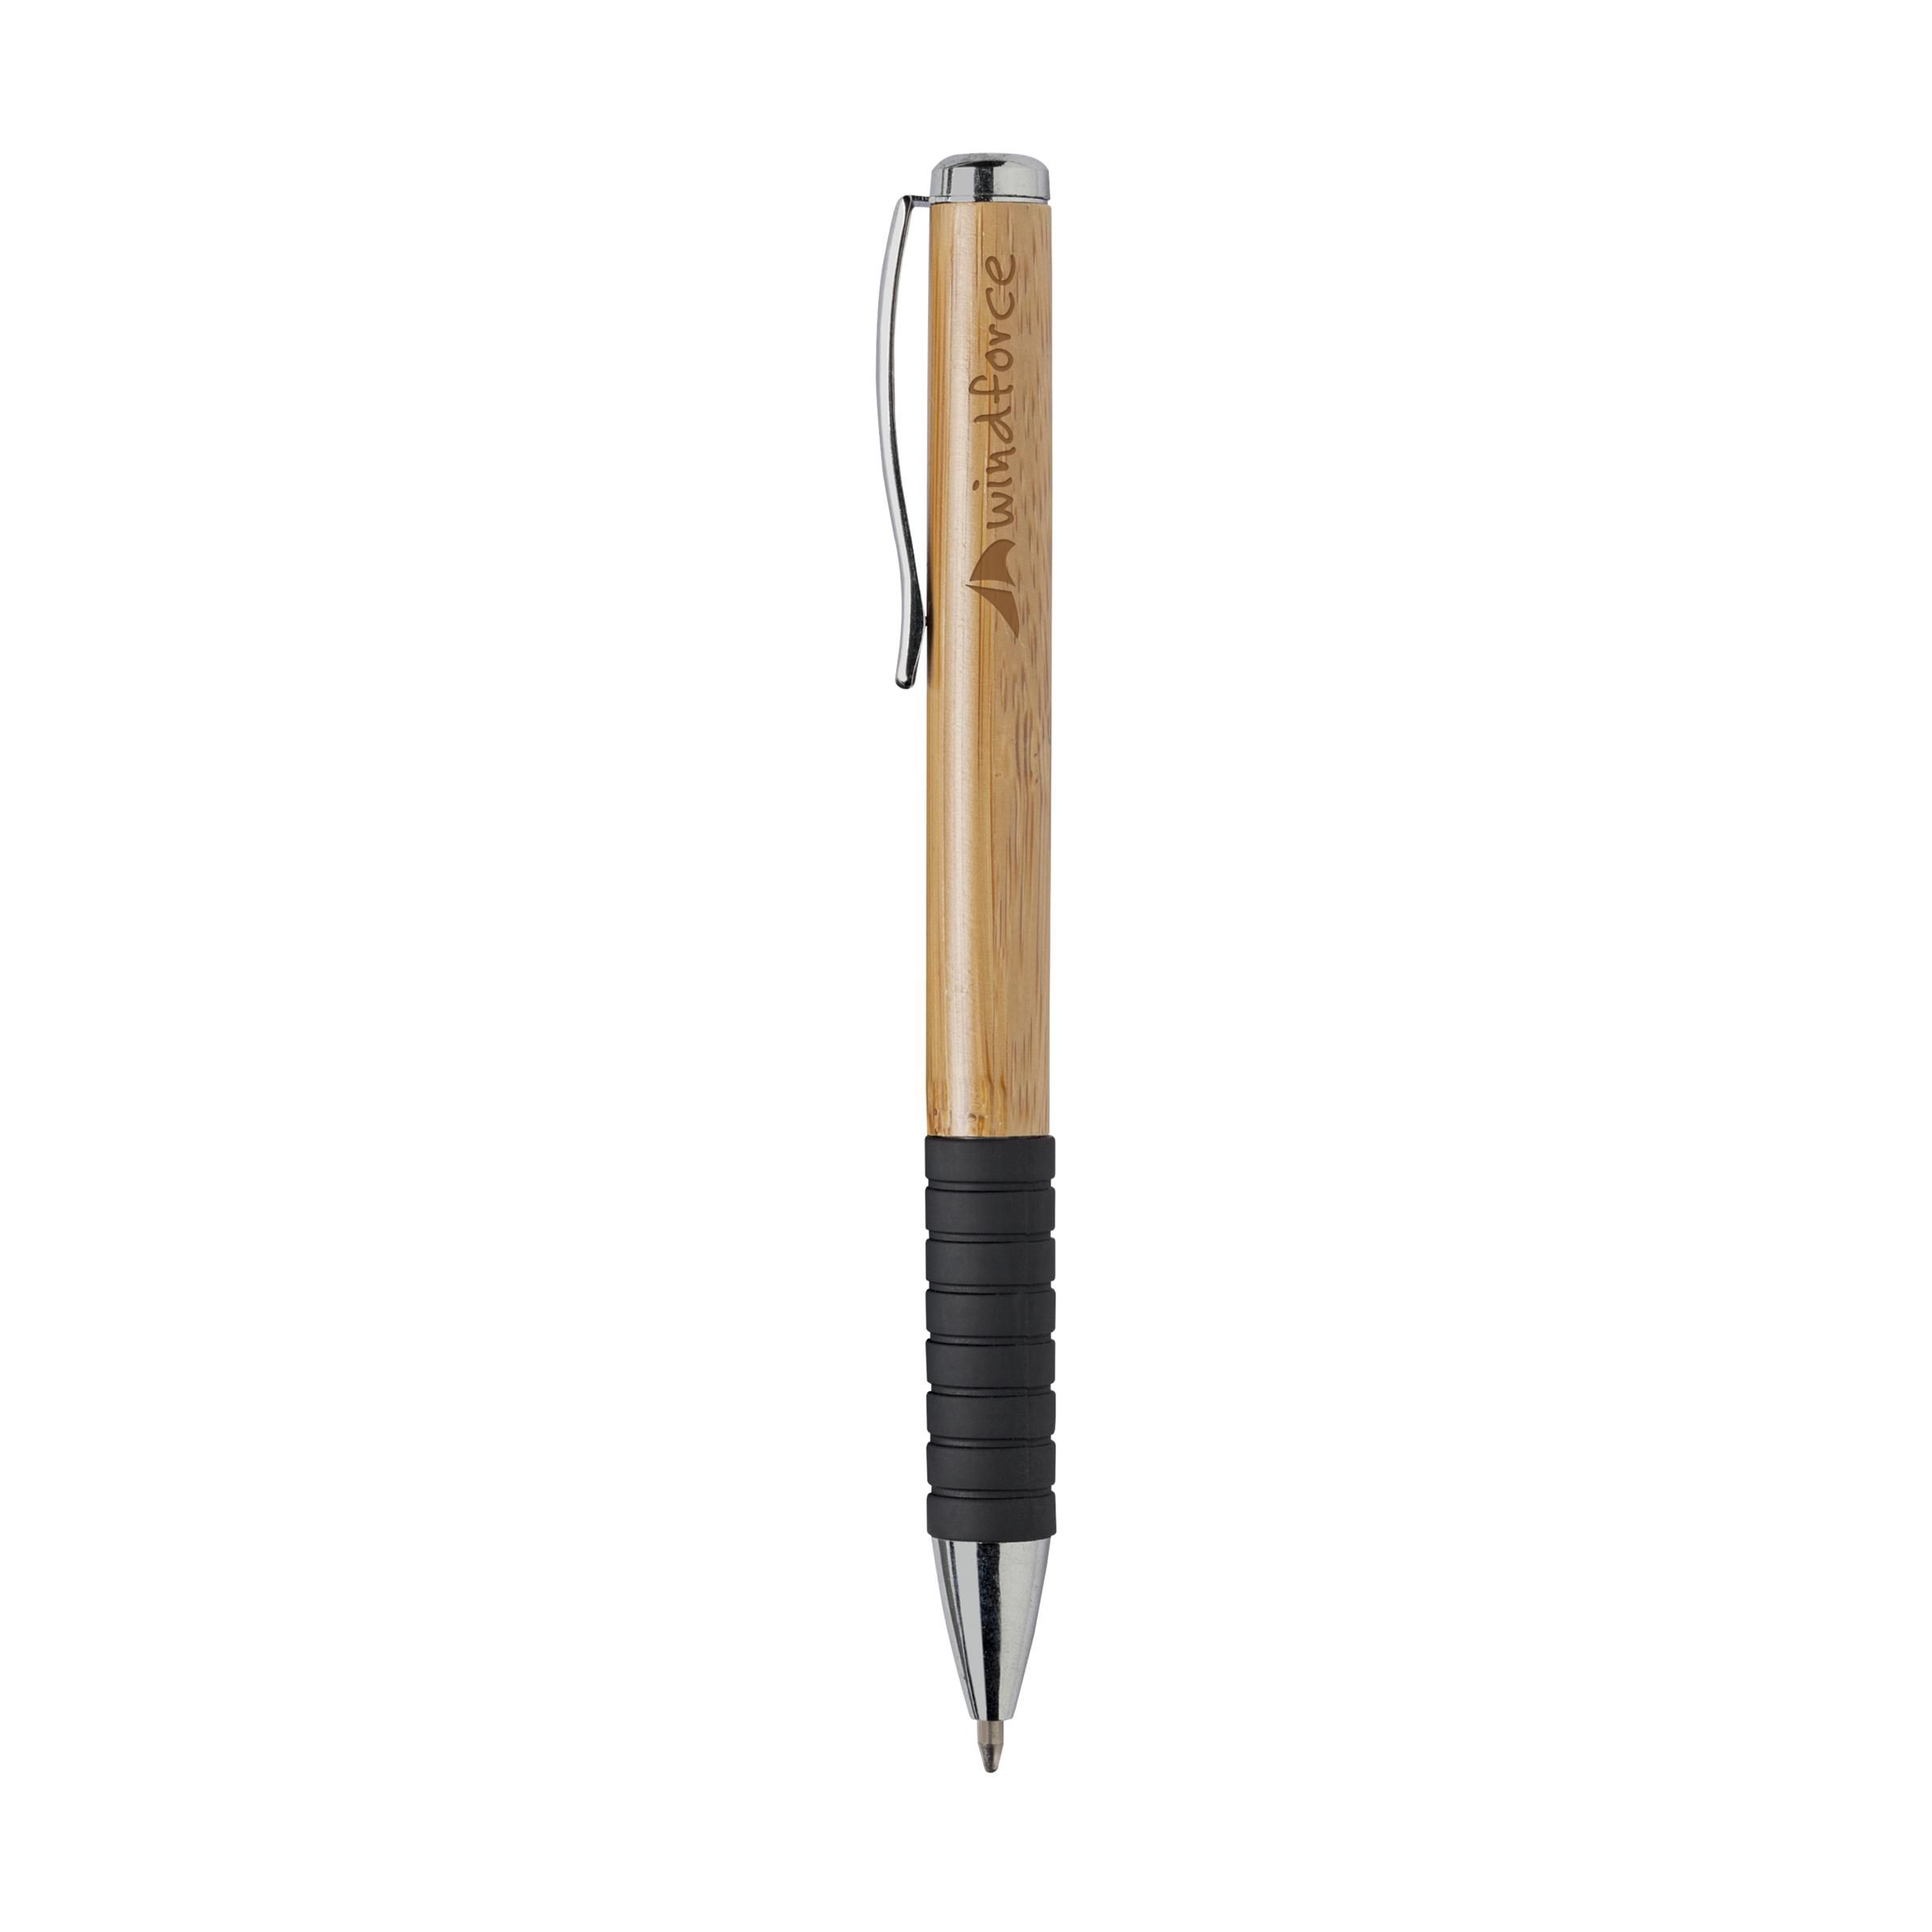 A ballpoint pen made of bamboo that comes with a colored rubber grip and a metal clip. - Toller Whelme